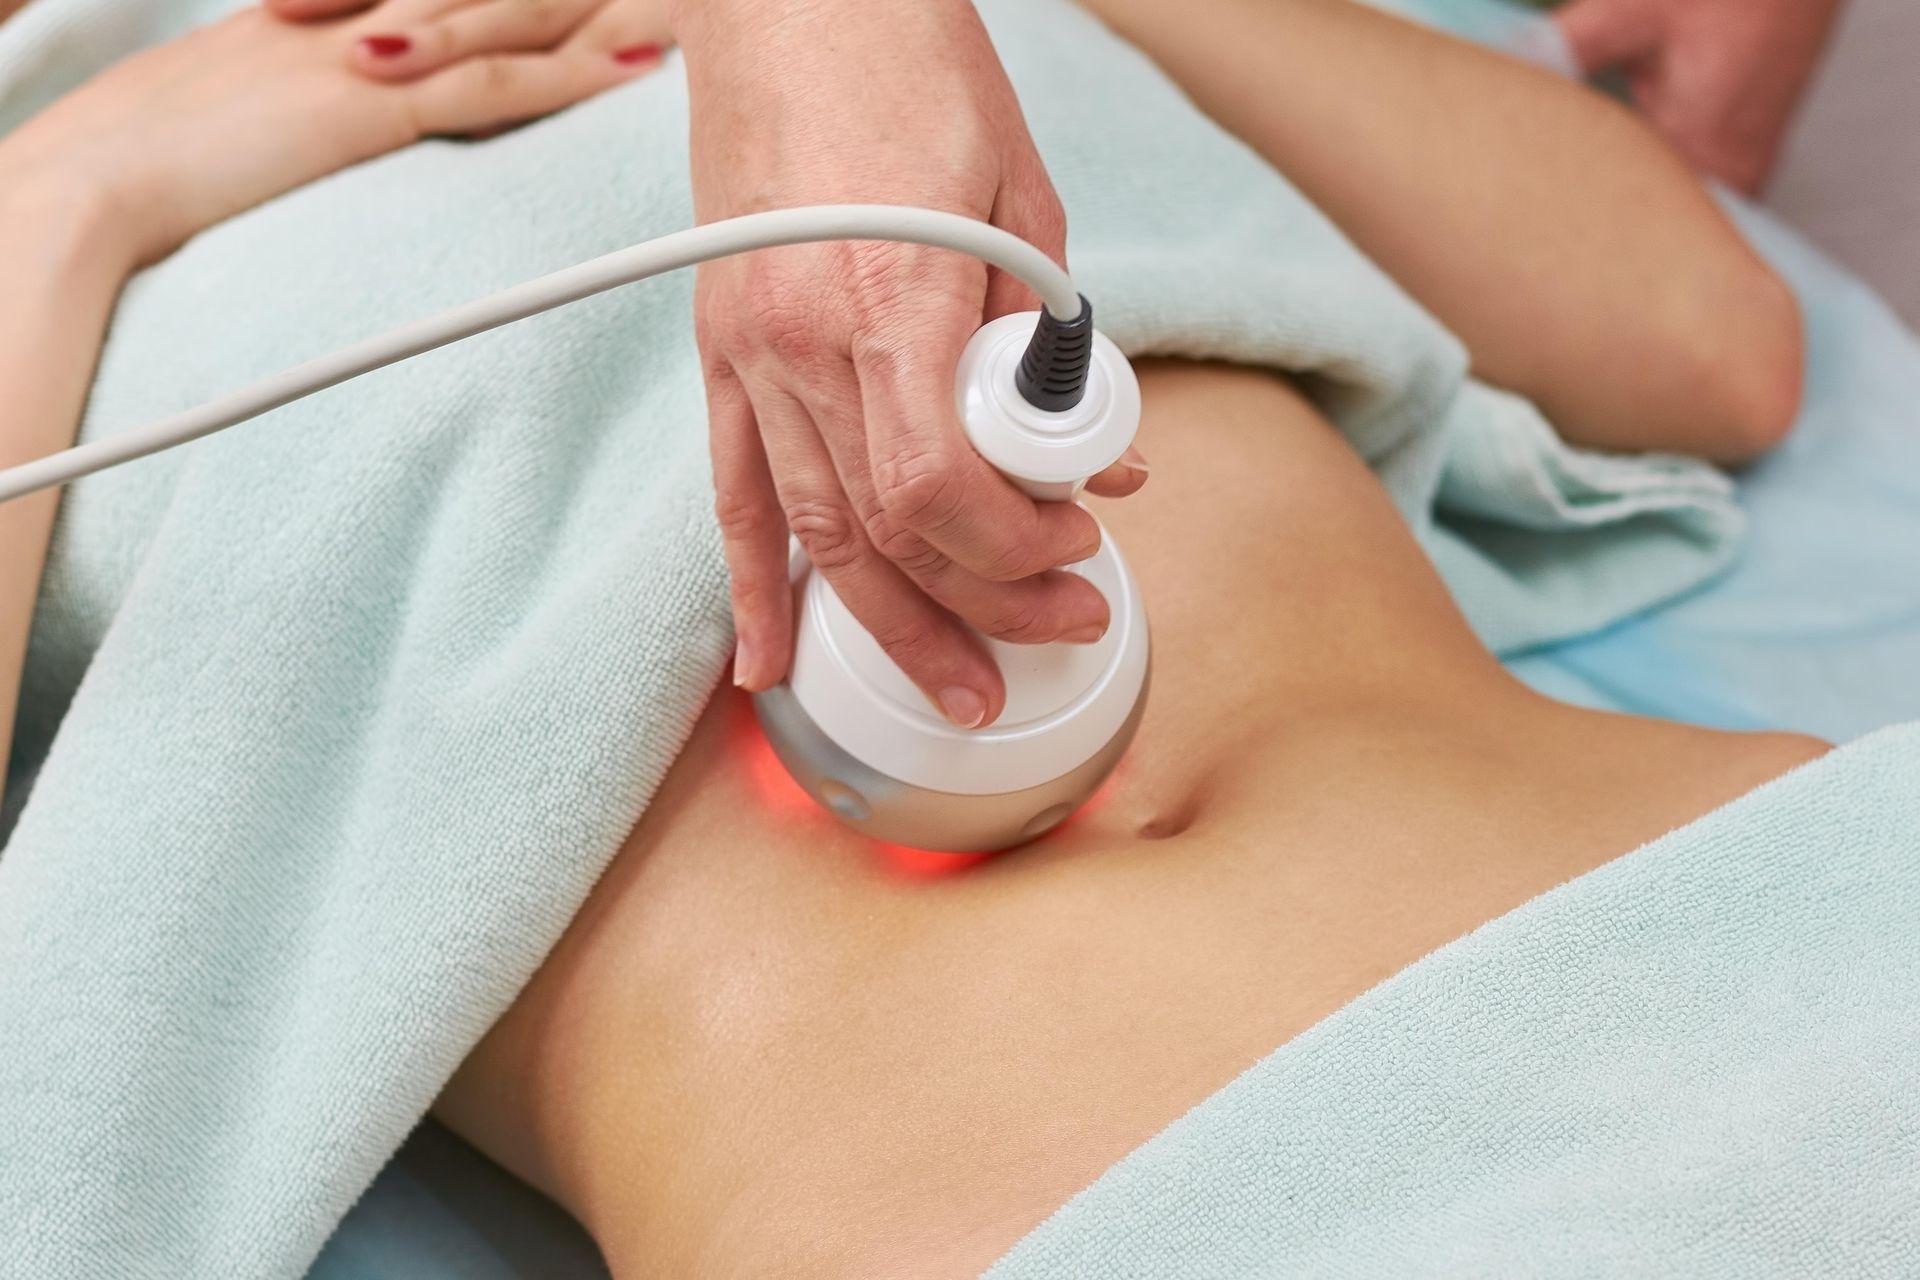 a woman is getting an ultrasound treatment on her stomach .